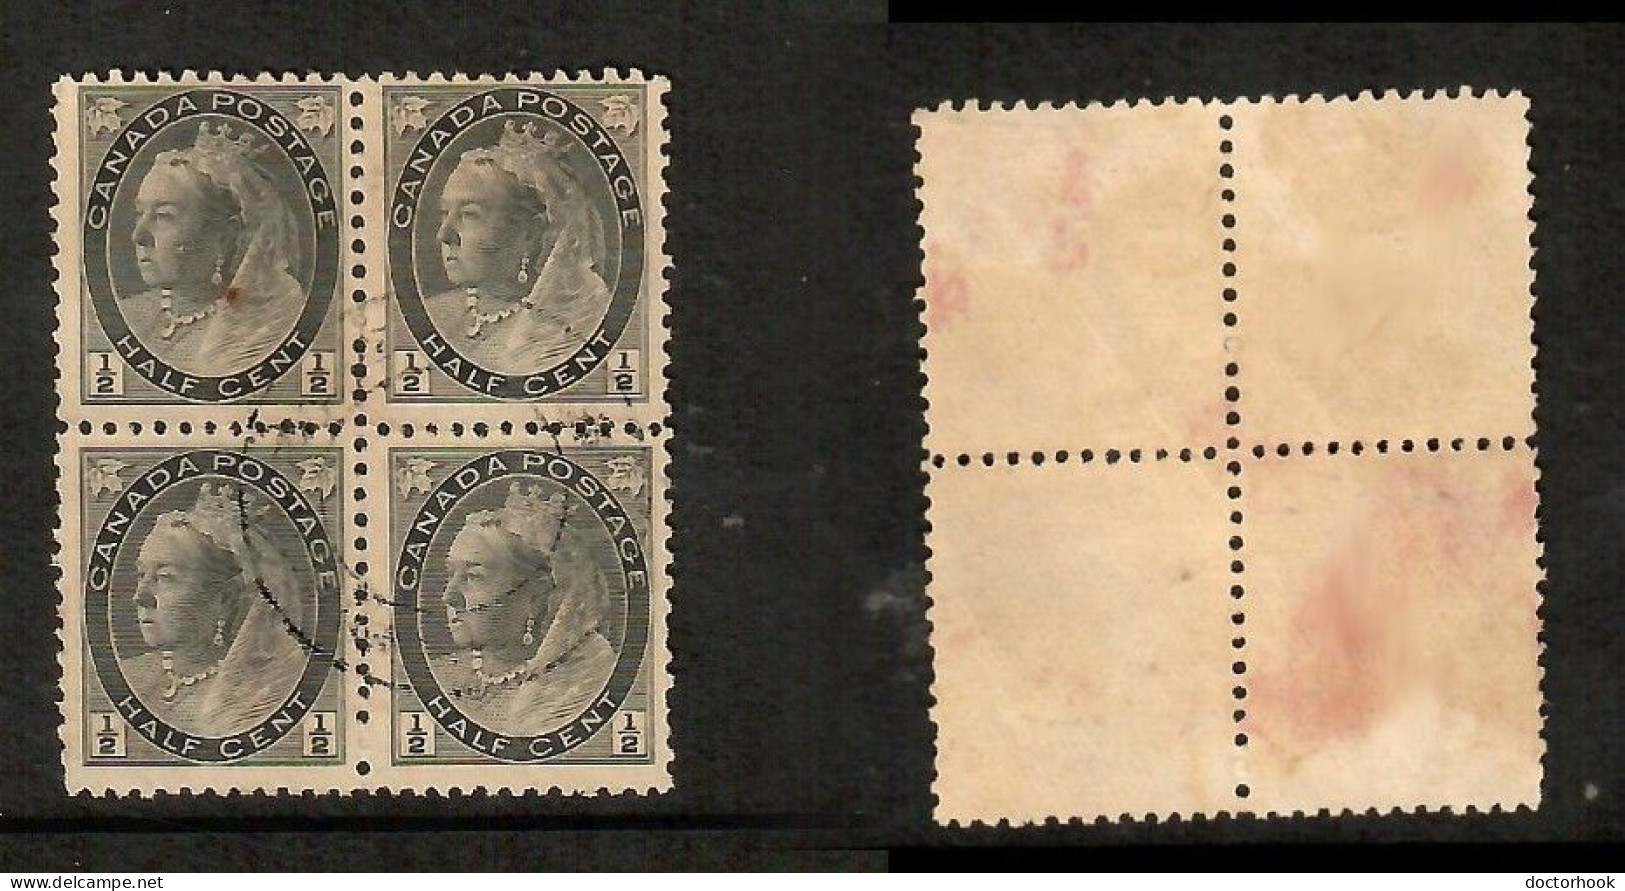 CANADA   Scott # 74 USED BLOCK Of 4 (CONDITION AS PER SCAN) (CAN-204) - Blocks & Sheetlets